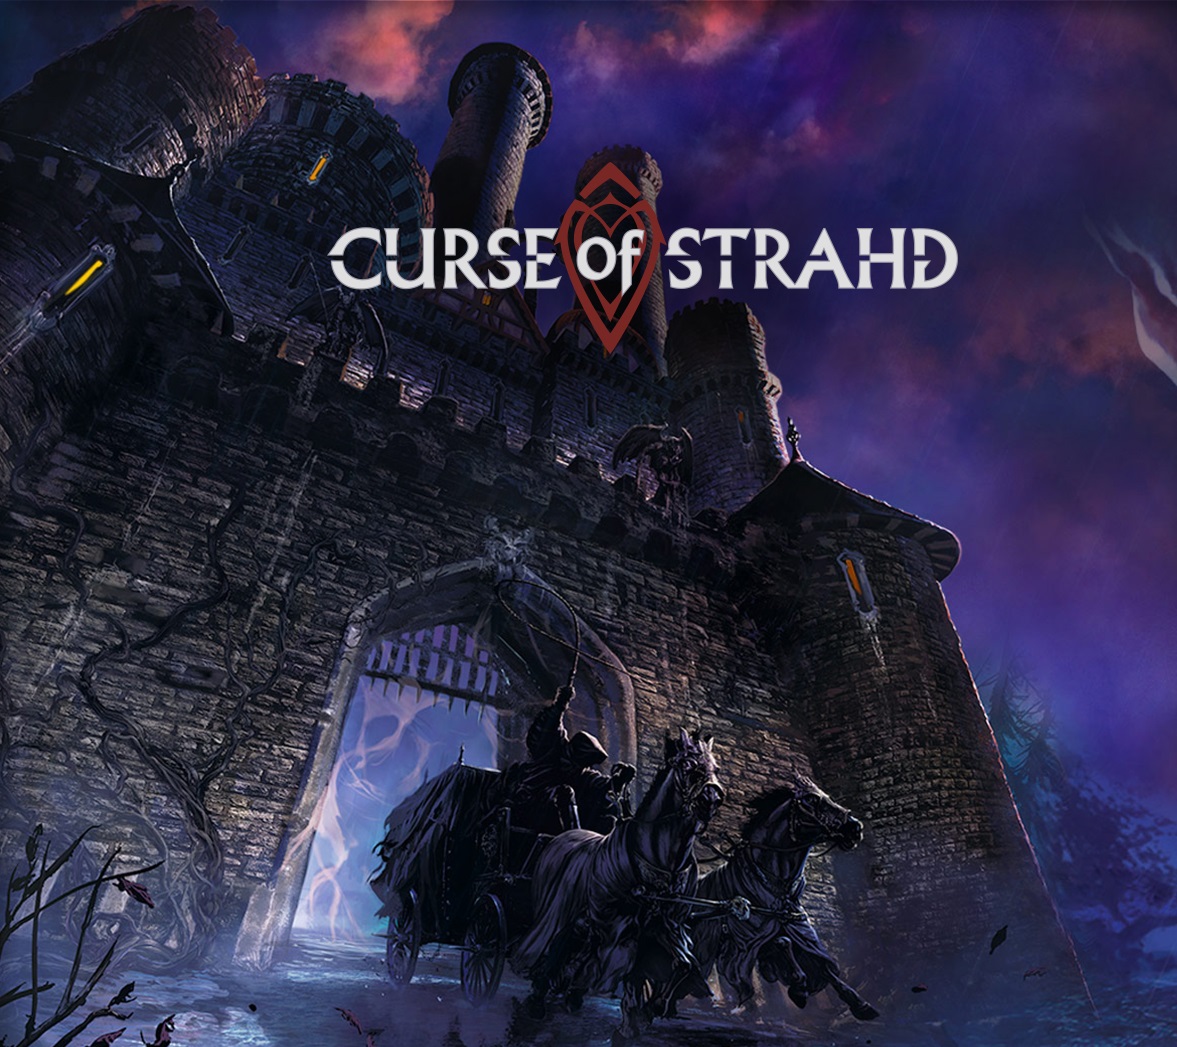 Power Score Dungeons Dragons How To Run Curse Of StraHD